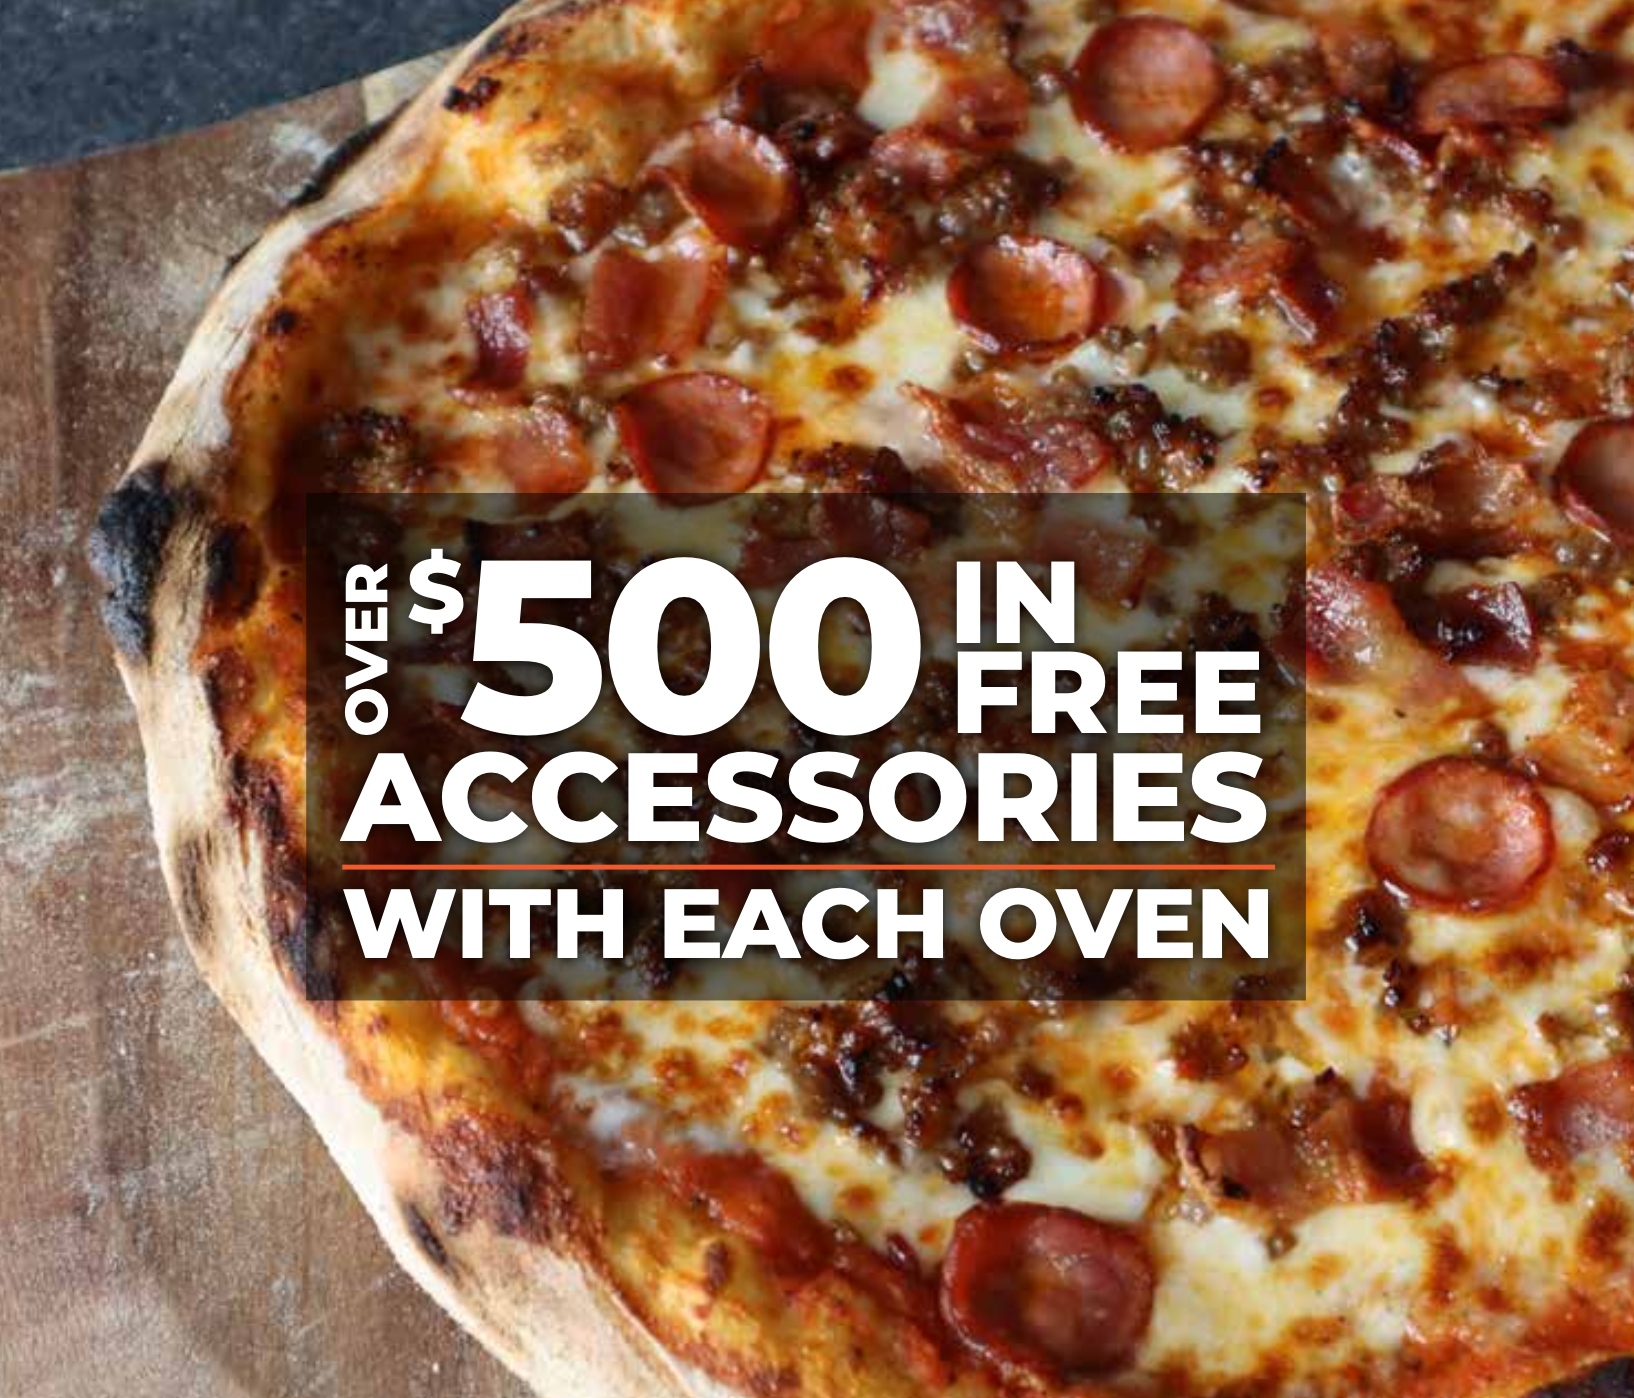 Over $500 in free accessories with each Pinnacolo Pizza Ovens 